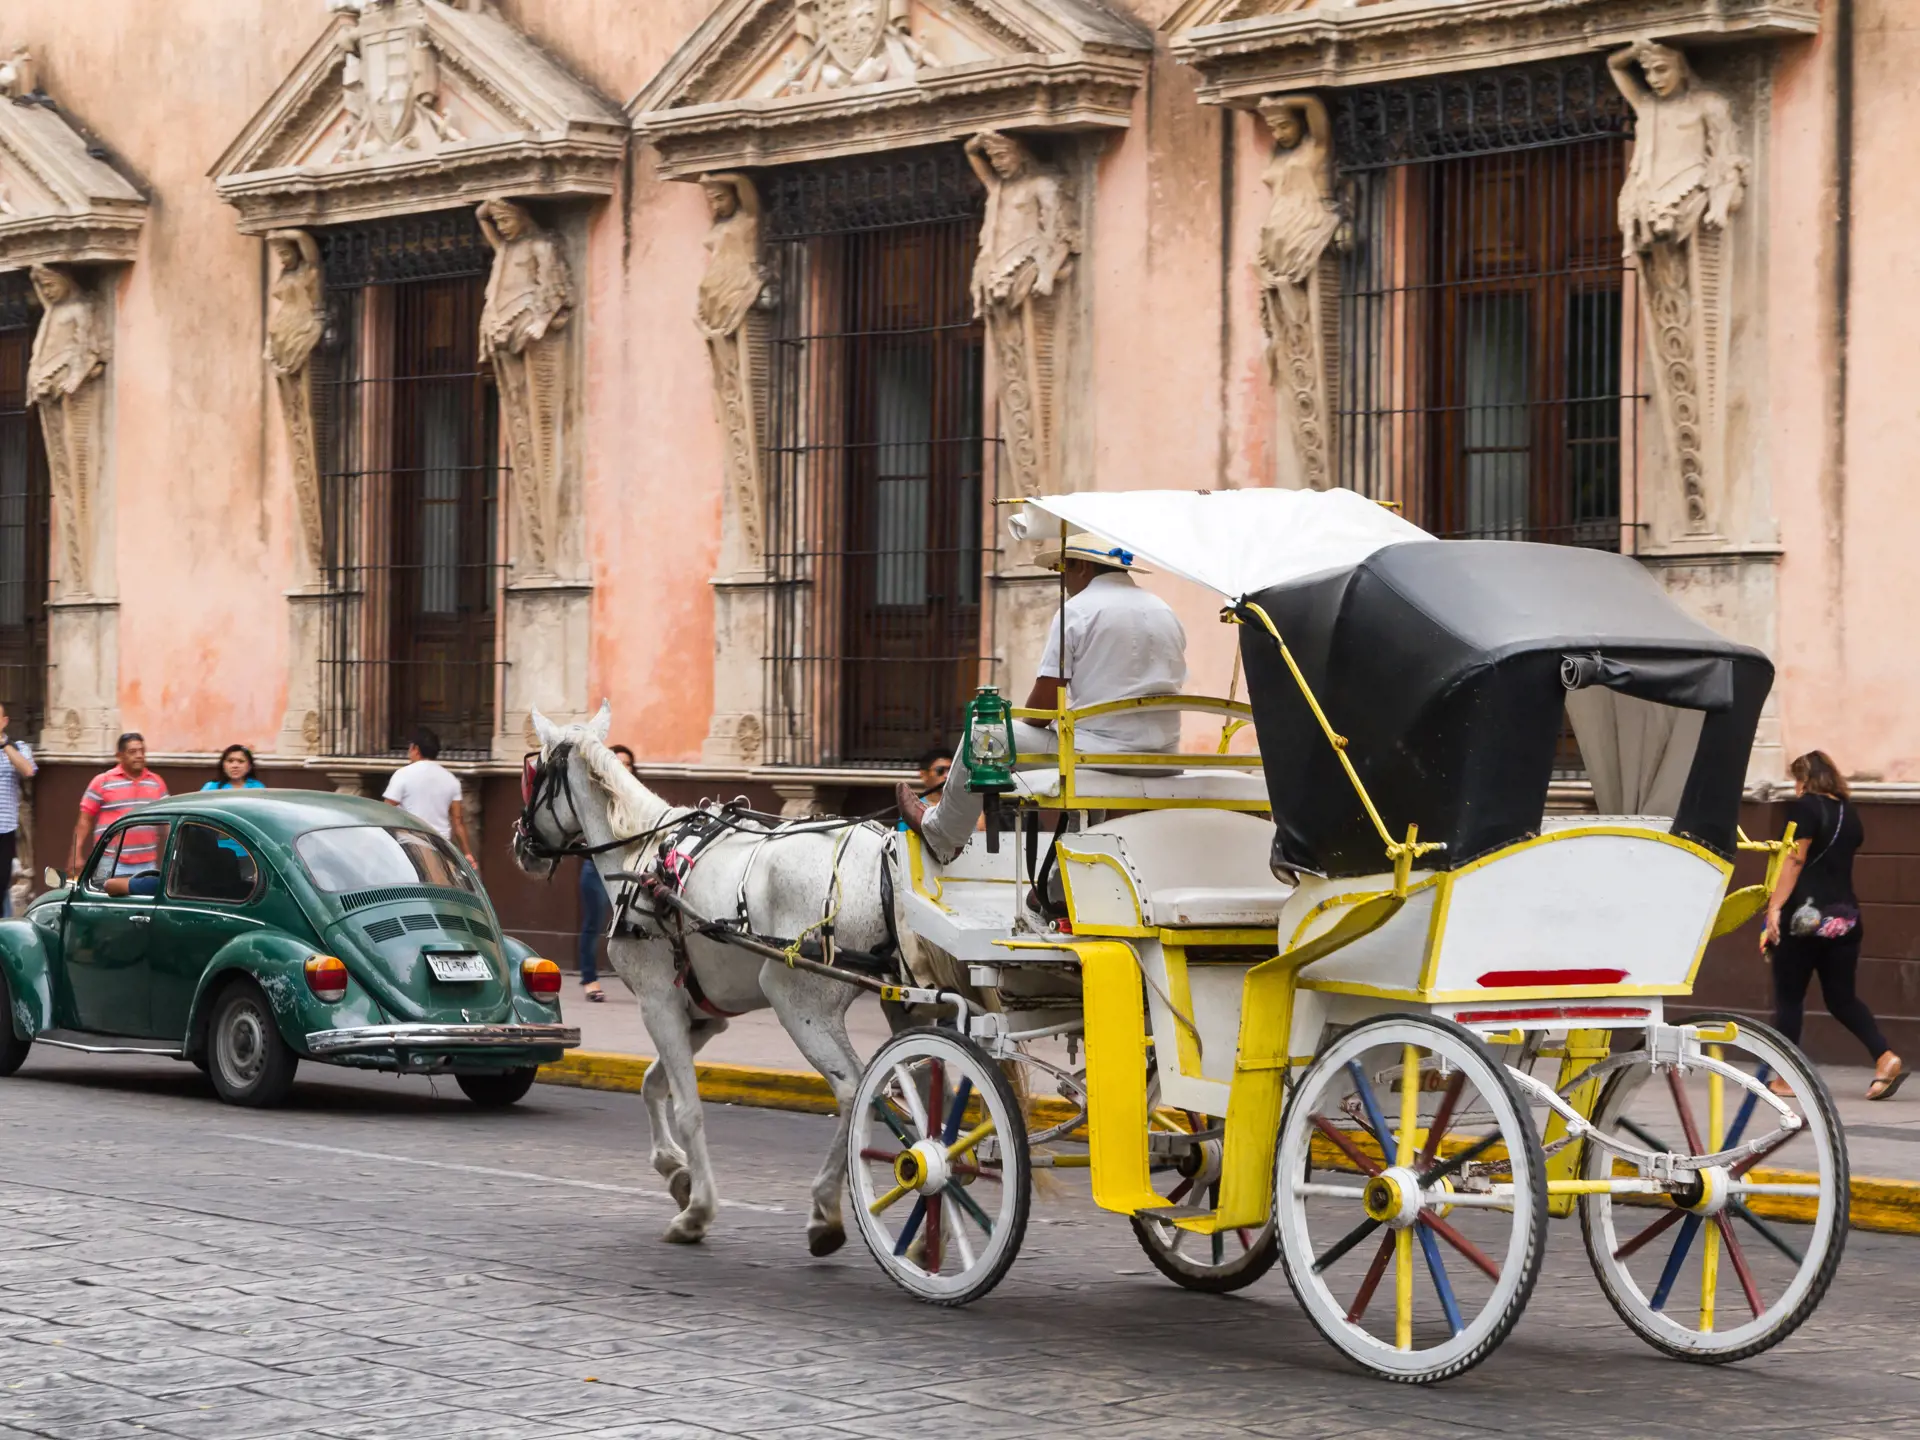 shutterstock_279300569 Horse carriages with passengers on a city street in Merida Mexico..jpg